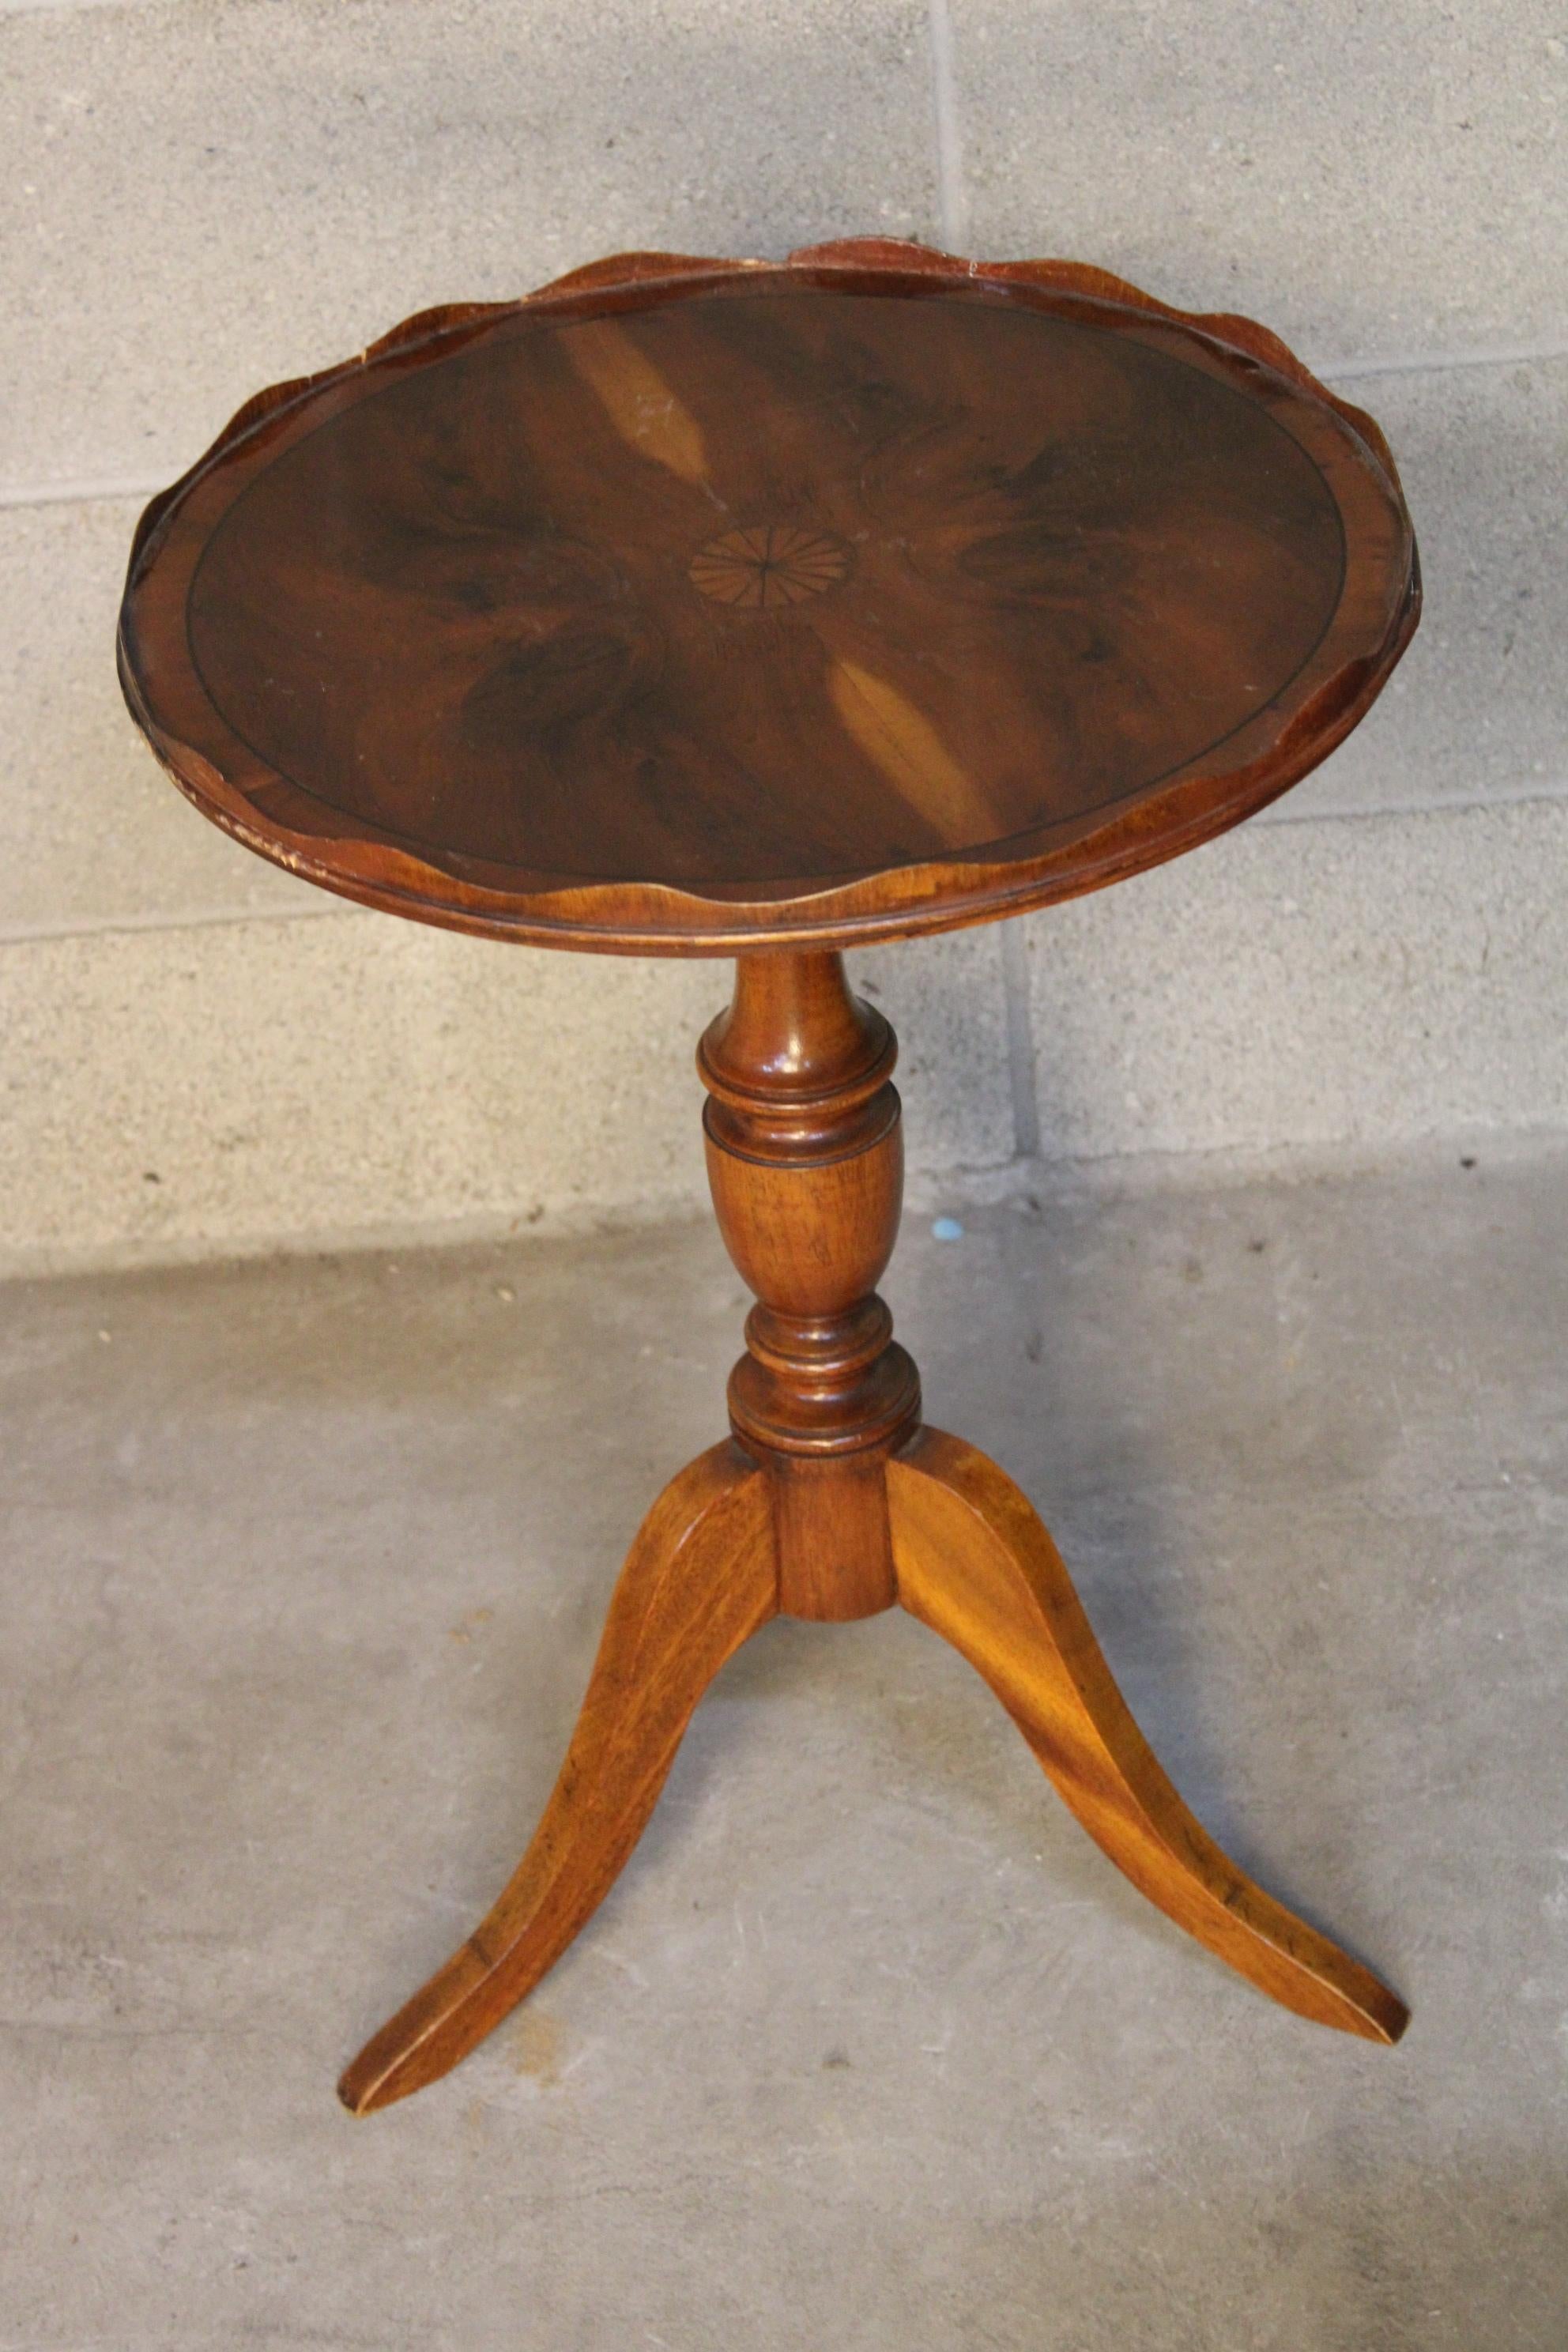 Lovely Antique Sheraton Revival Hardwood Tripod Side End Lamp Wine Table
19th century England
We are delighted to offer this lovely late Victorian Sheraton Revival tripod table

A very good looking well made and decorative piece, it sits well in any